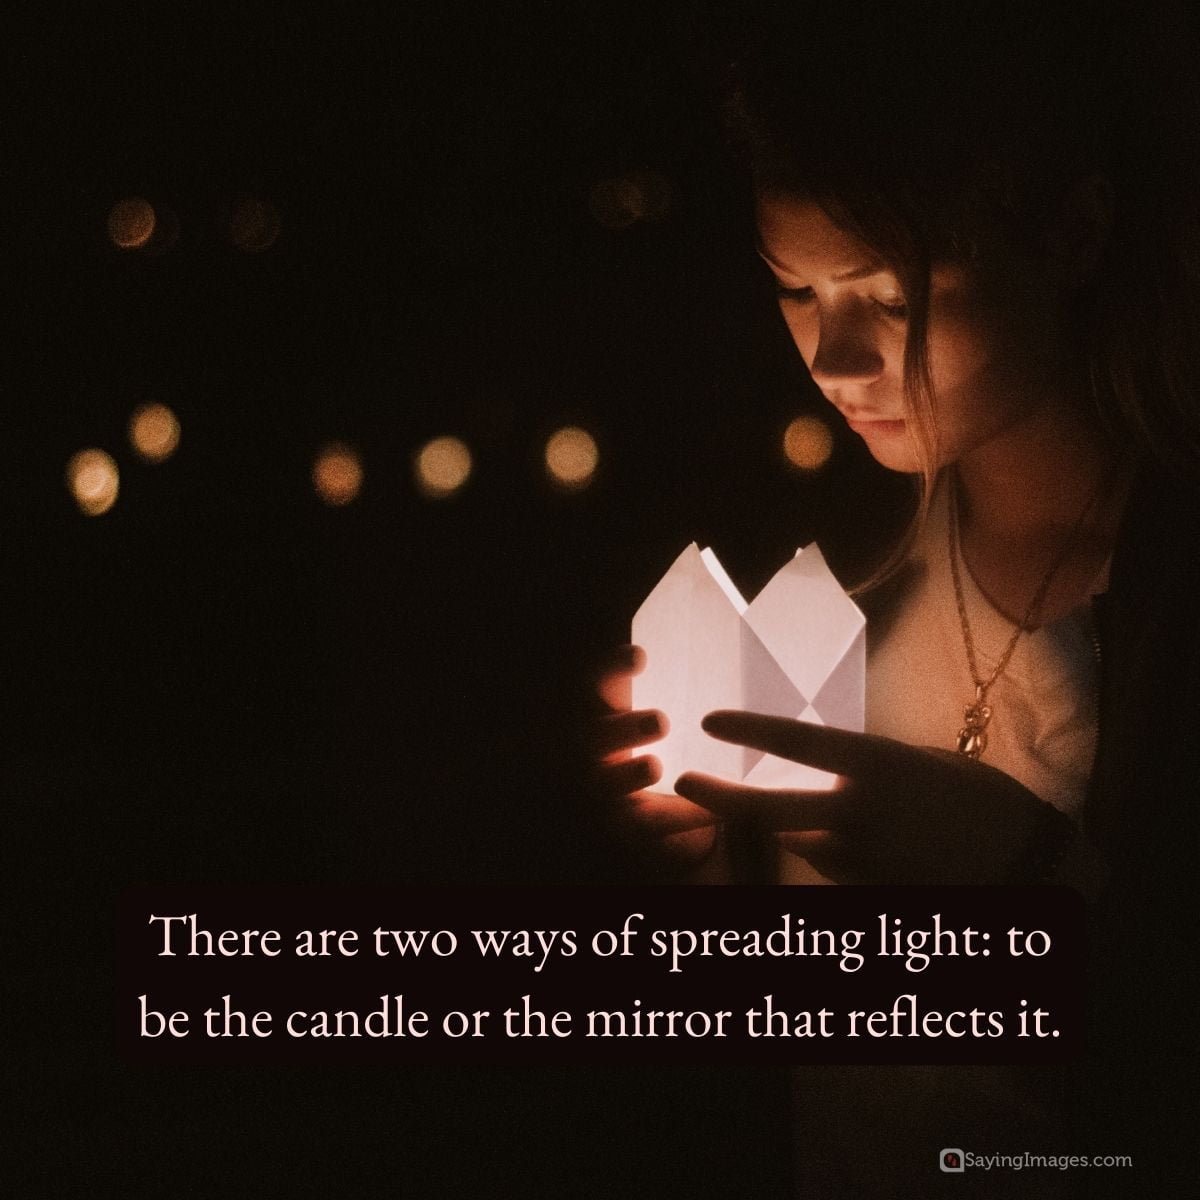 There are two ways of spreading light: to be the candle or the mirror that reflects it